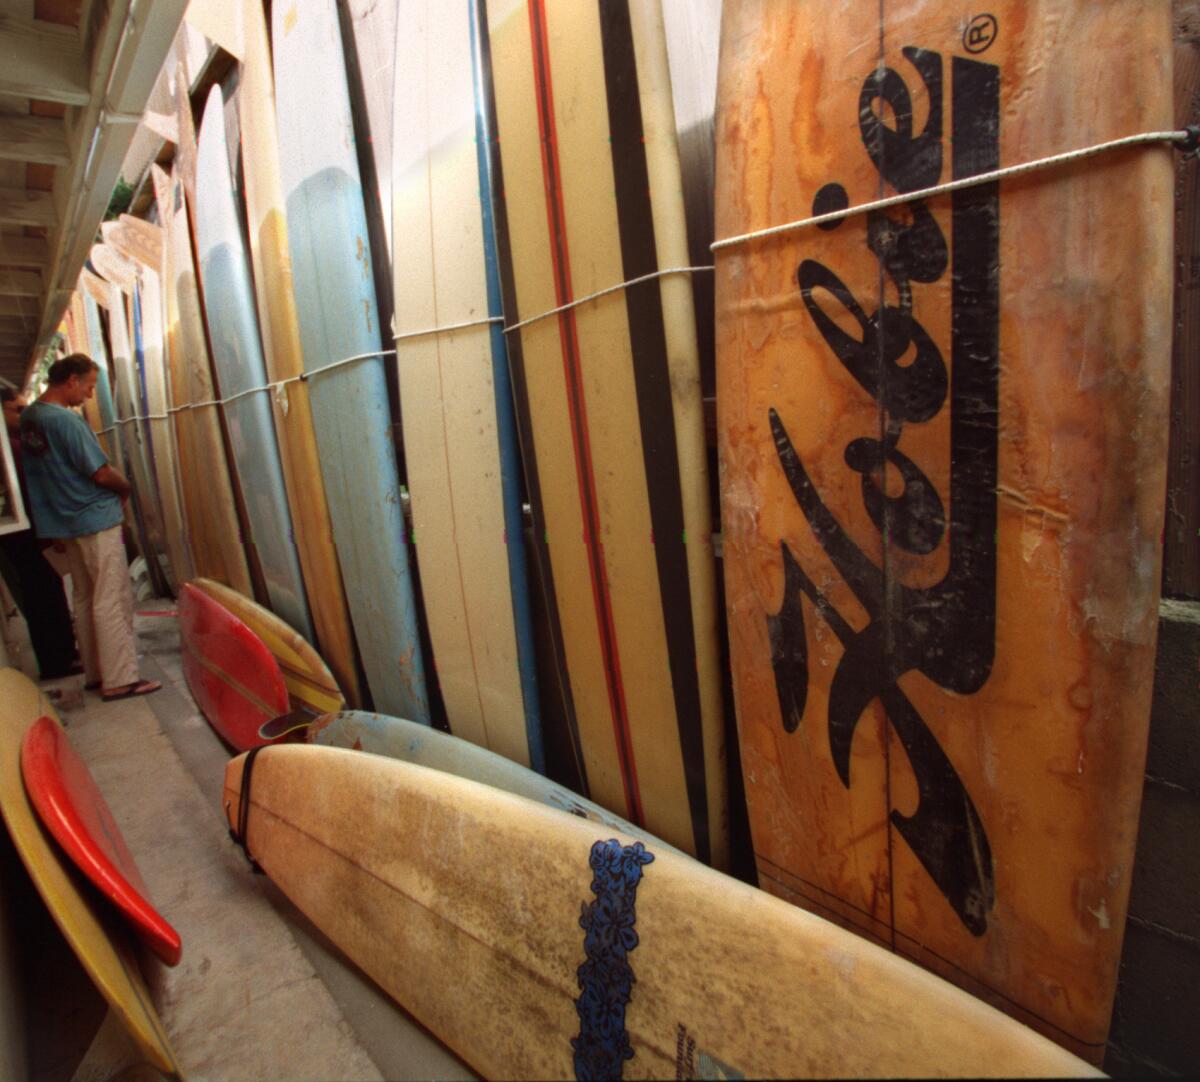 A cache of vintage Hobie boards sold at auction by a longtime collector and Hobie employee. Hobie Alter, who founded the company, died Saturday at the age of 80.